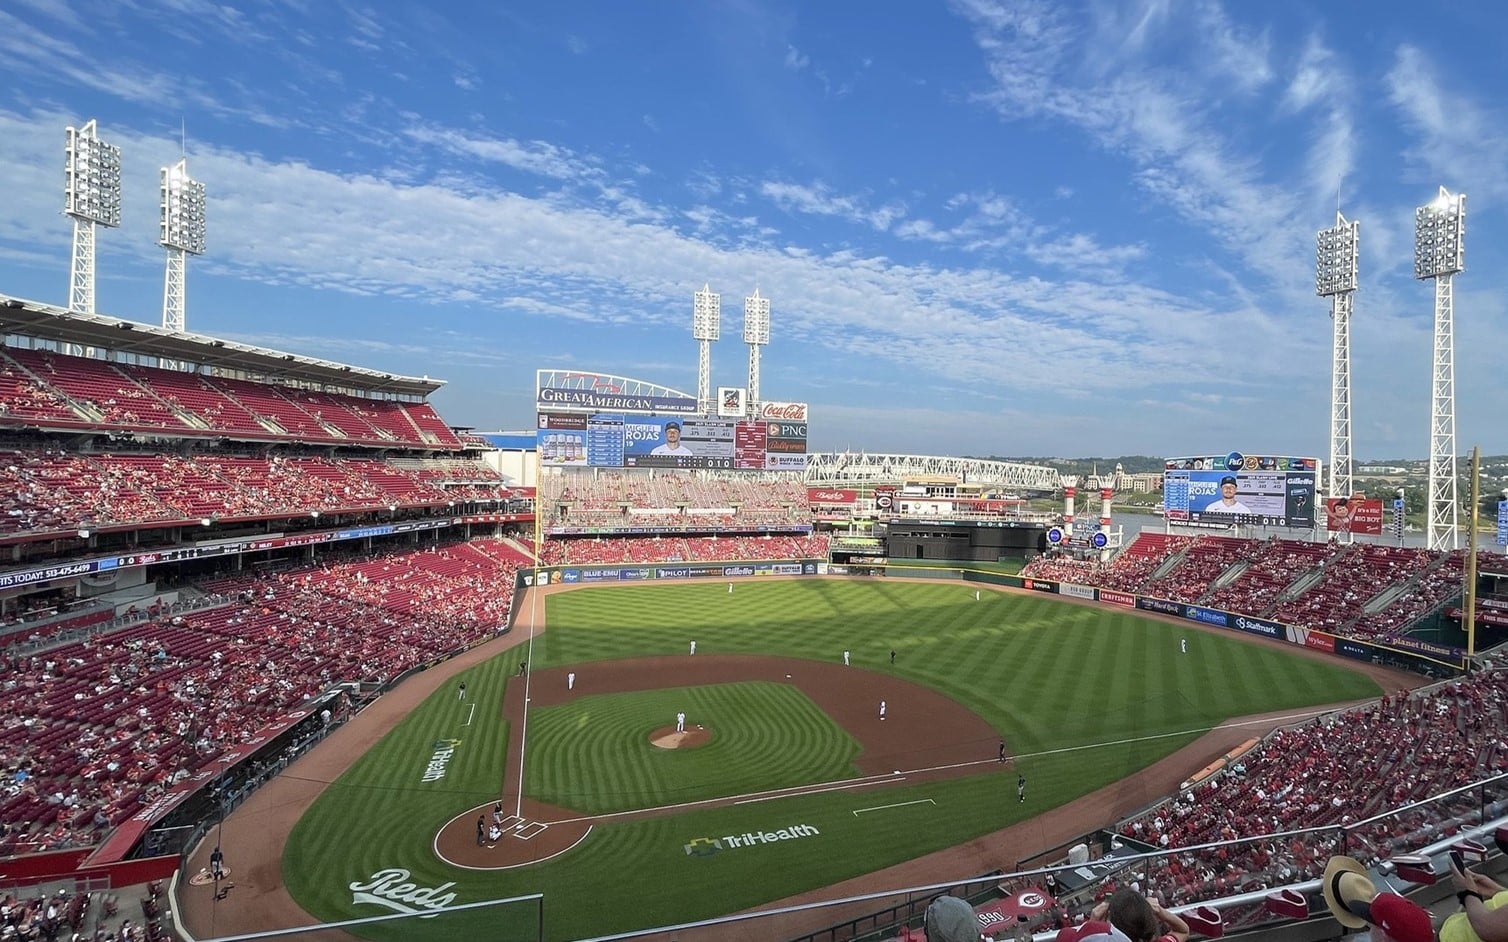 Great American Ballpark Parking Guide: Rates, Maps, Tips